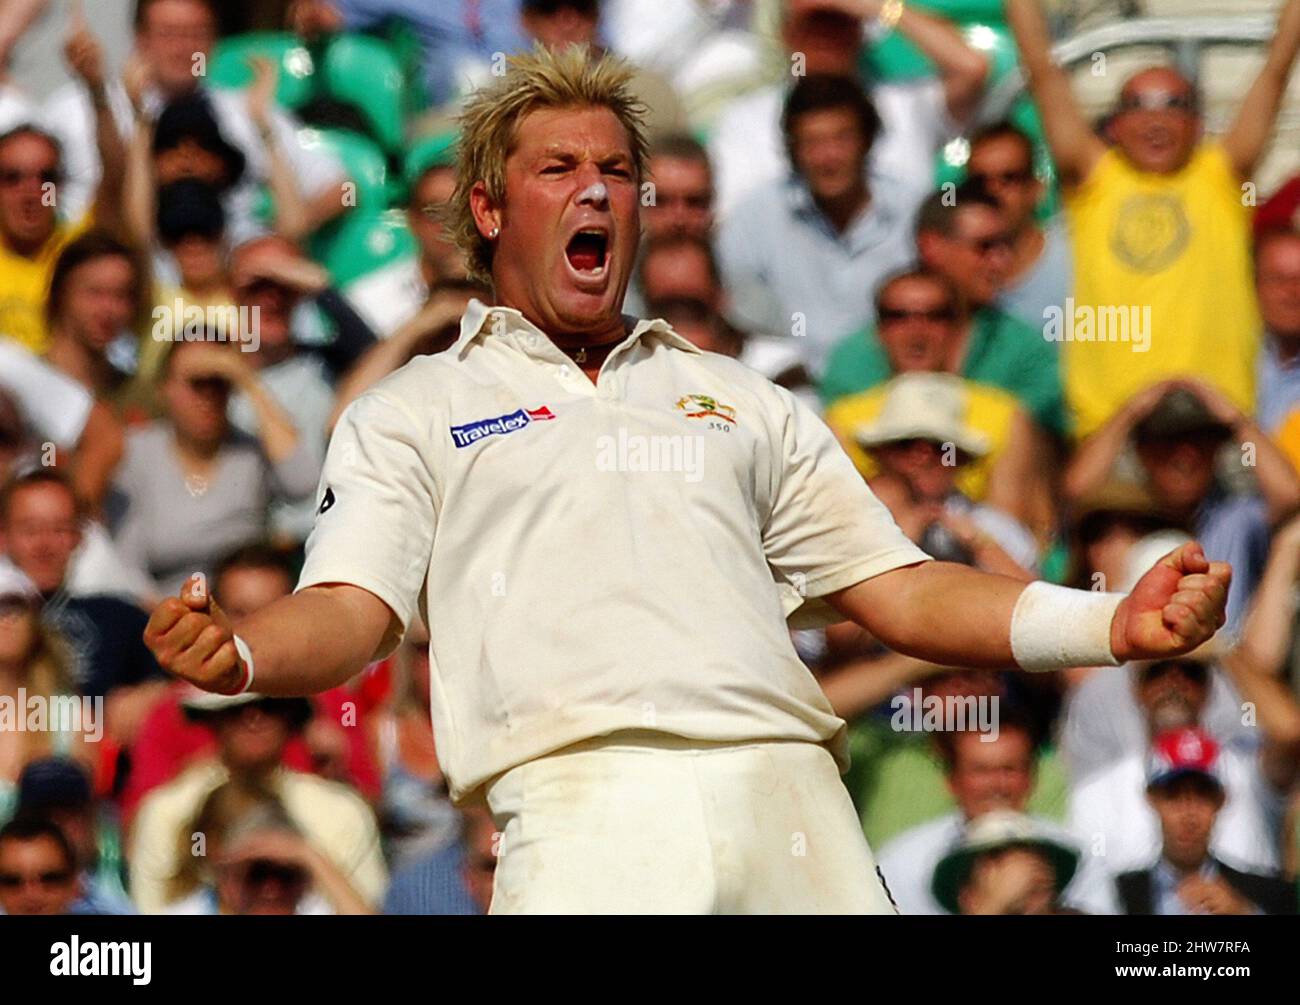 File photo dated 12-09-2005 of Australia's Shane Warne celebrates after he caught and bowled England's Andrew Flintoff for 8 runs during the final day of the fifth npower Test match at the Brit Oval, London. Former Australia cricketer Shane Warne has died at the age of 52, his management company MPC Entertainment has announced in a statement. Issue date: Friday March 4, 2022. Stock Photo